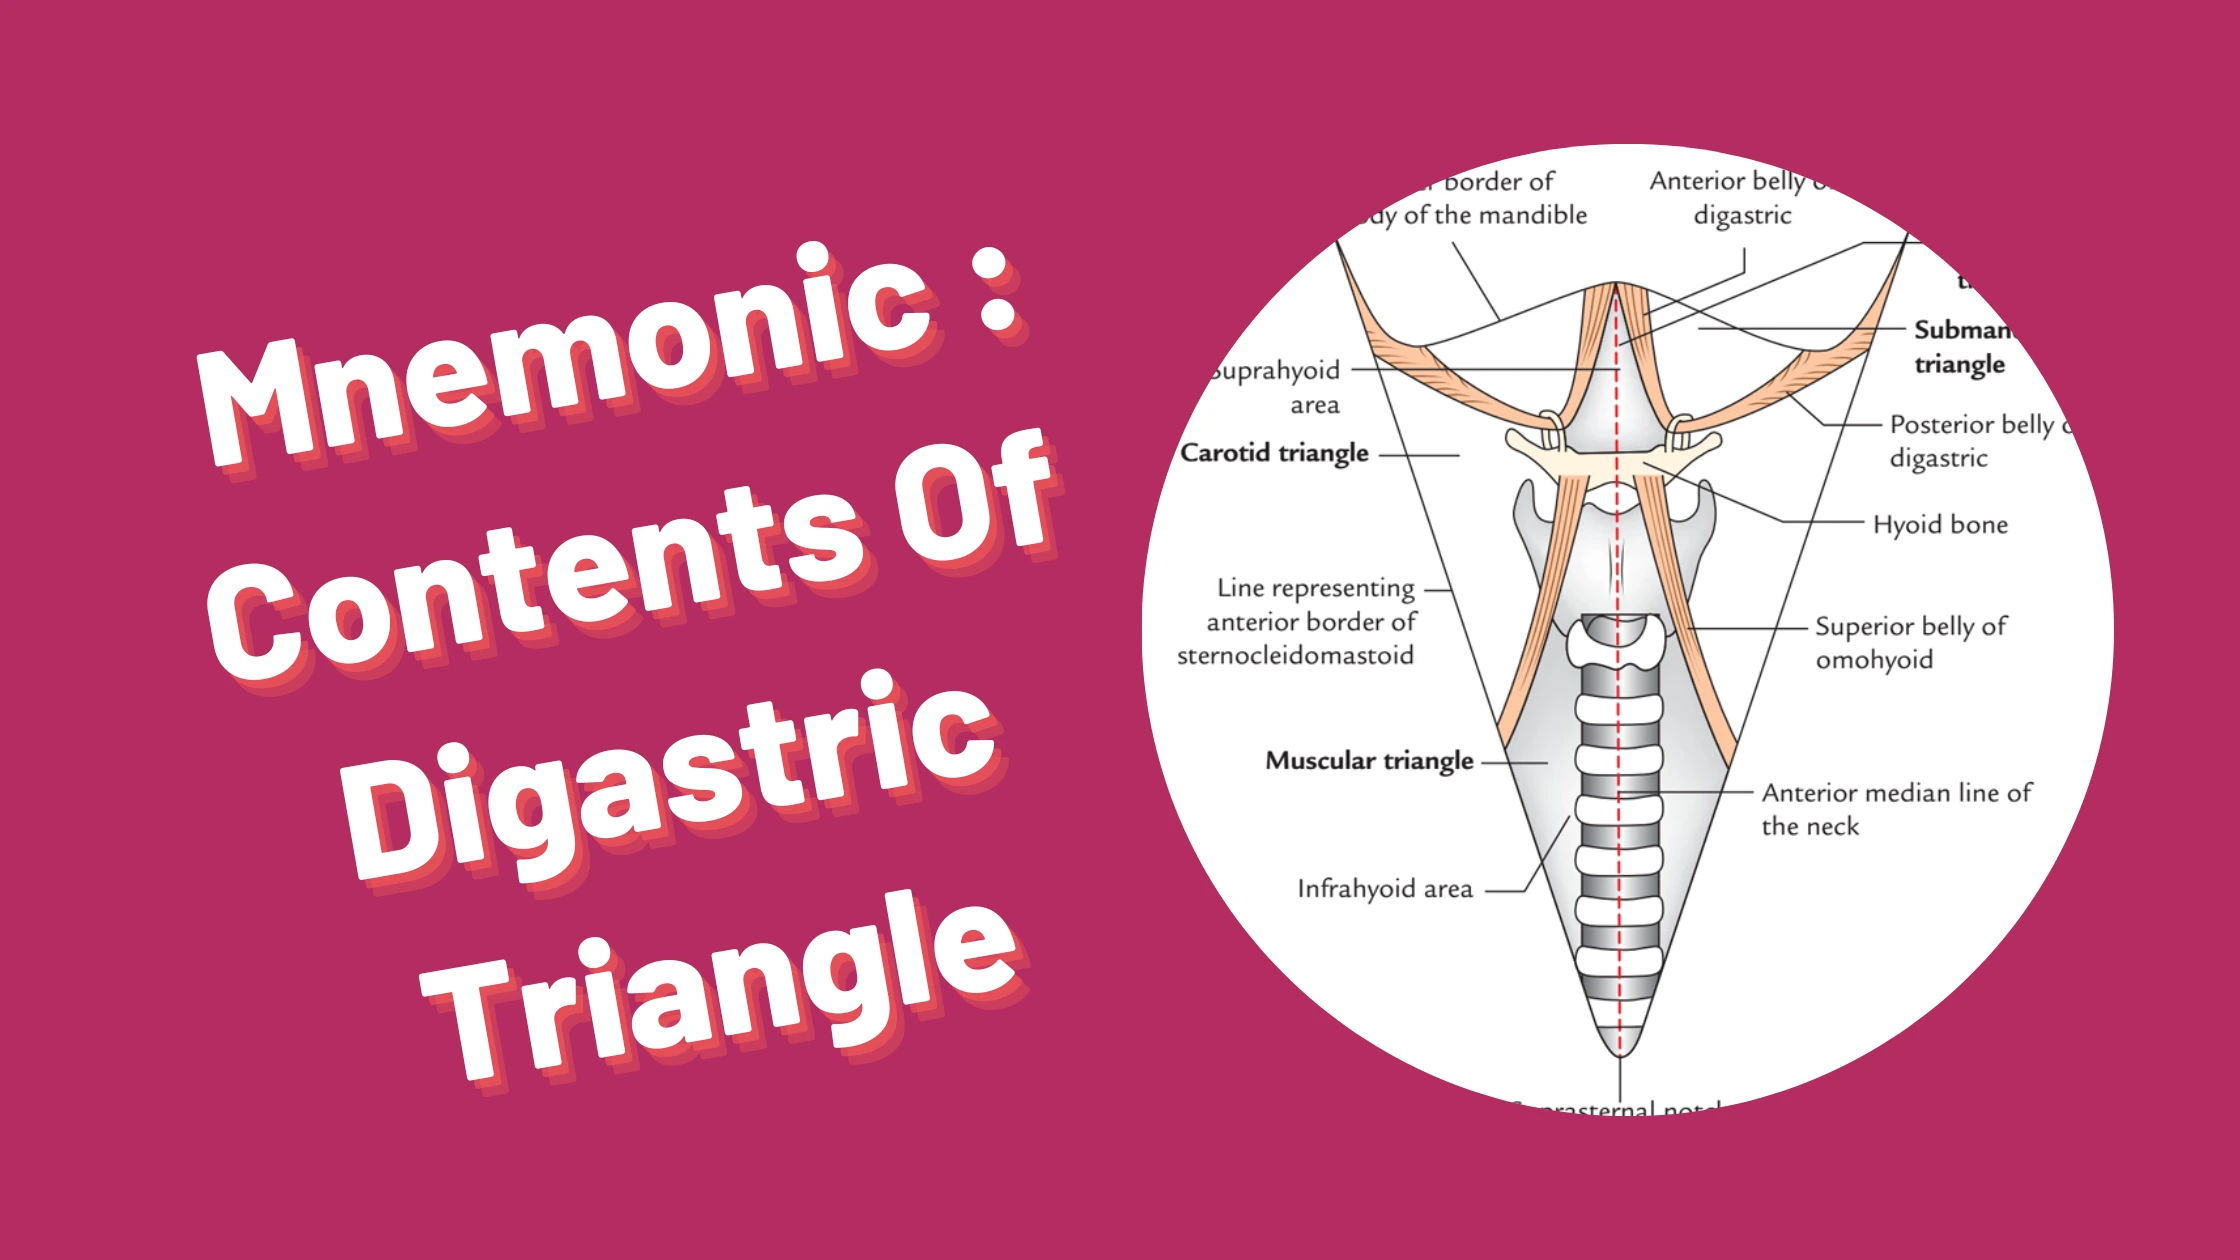 You are currently viewing [Very Cool] Mnemonic : Digastric Triangle Contents